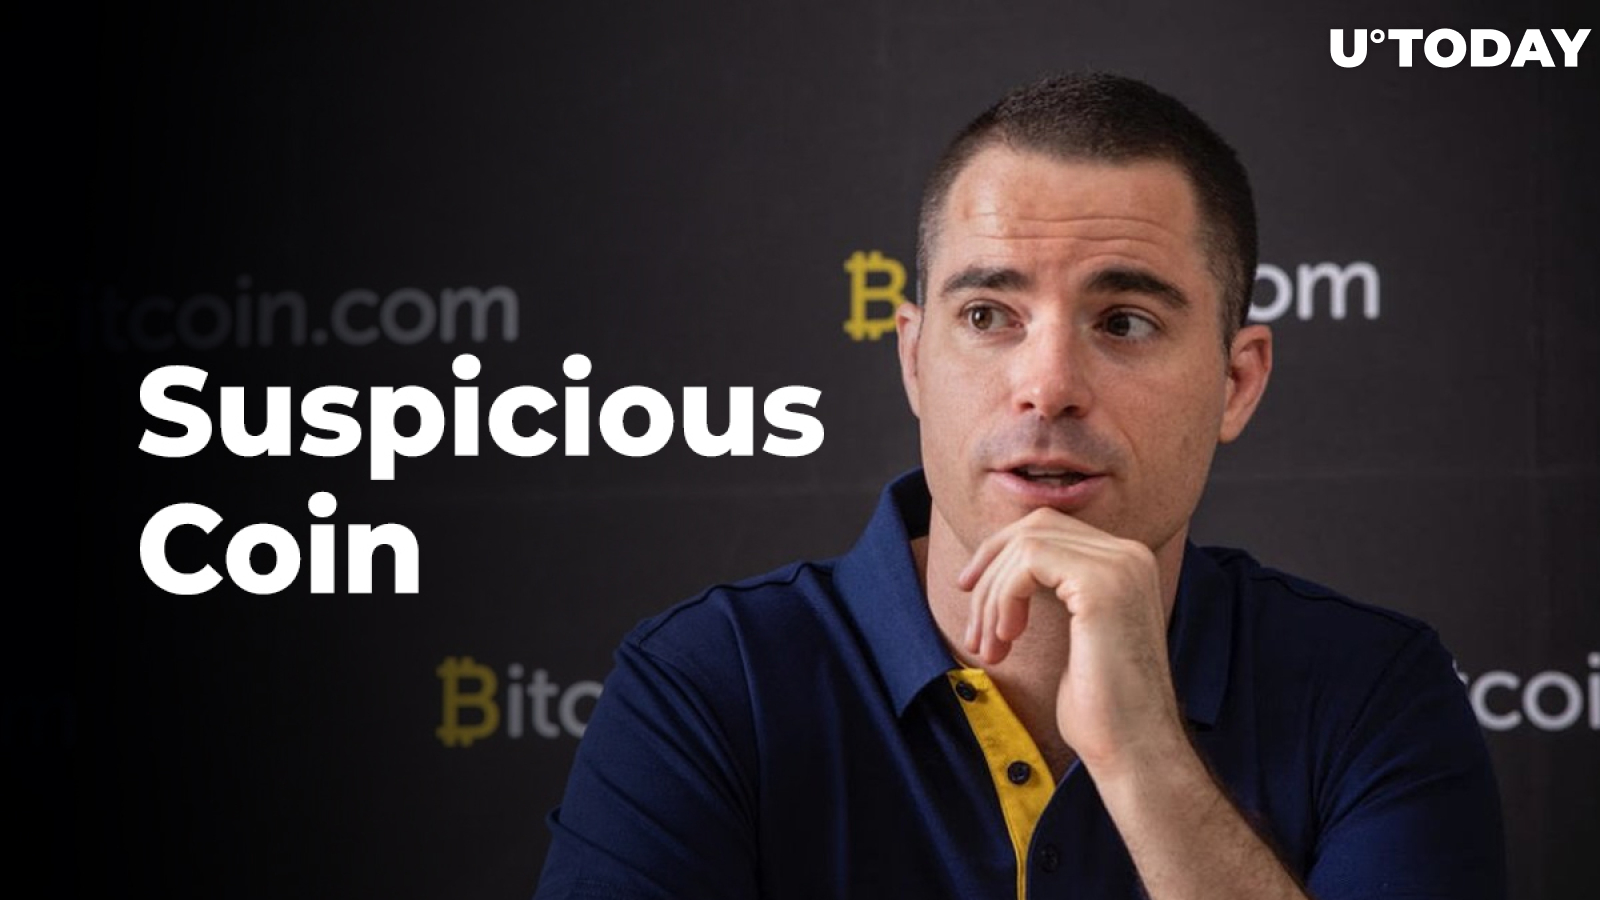 Roger Ver Weighs in on Bitcoin.com Listing Suspicious Coin HEX